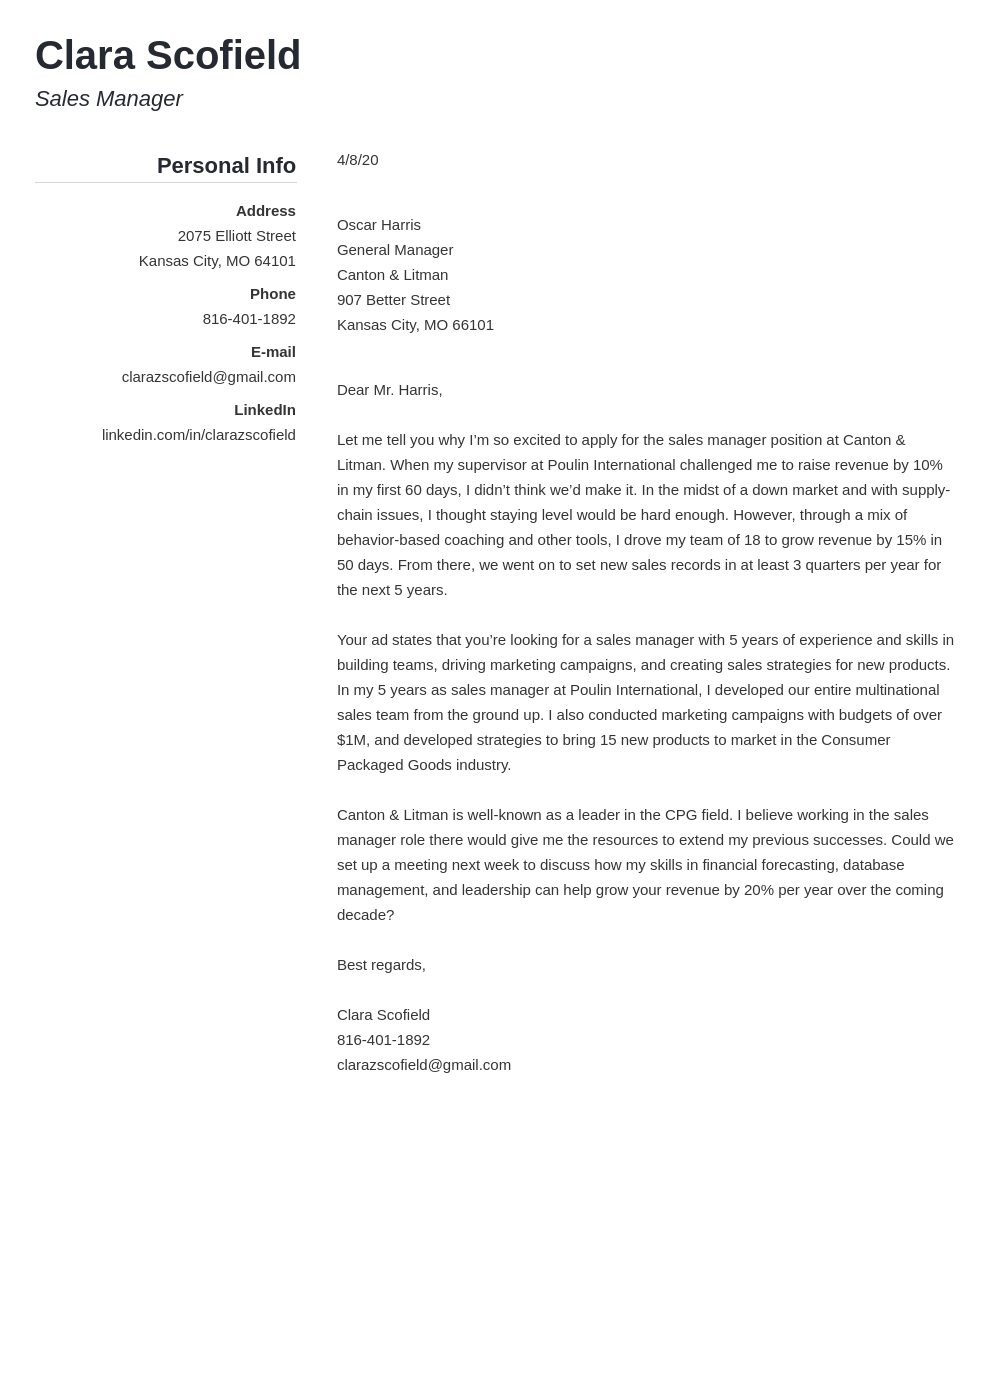 Sales Manager Cover Letter Examples & Writing Guide